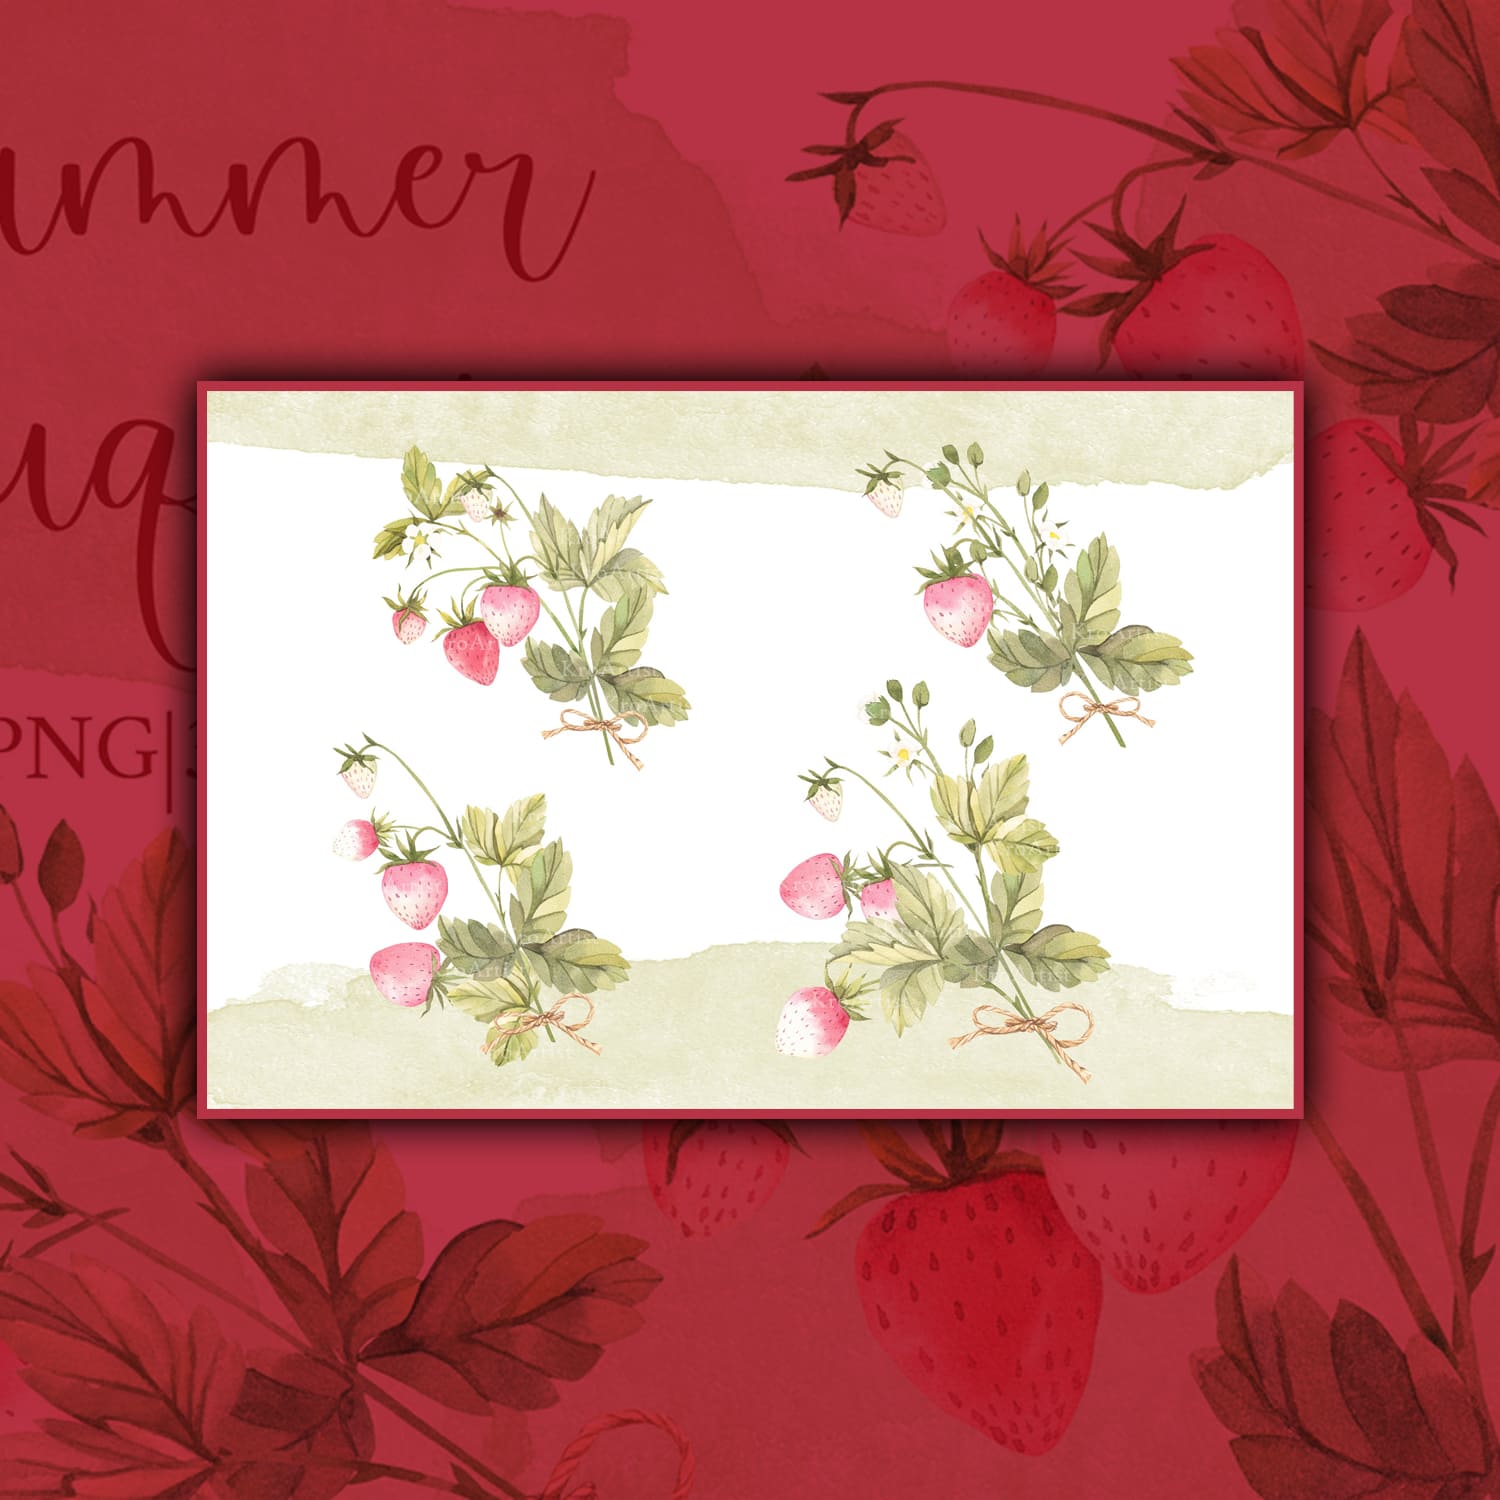 On a burgundy background, a white slide with painted bushes with pink strawberries.